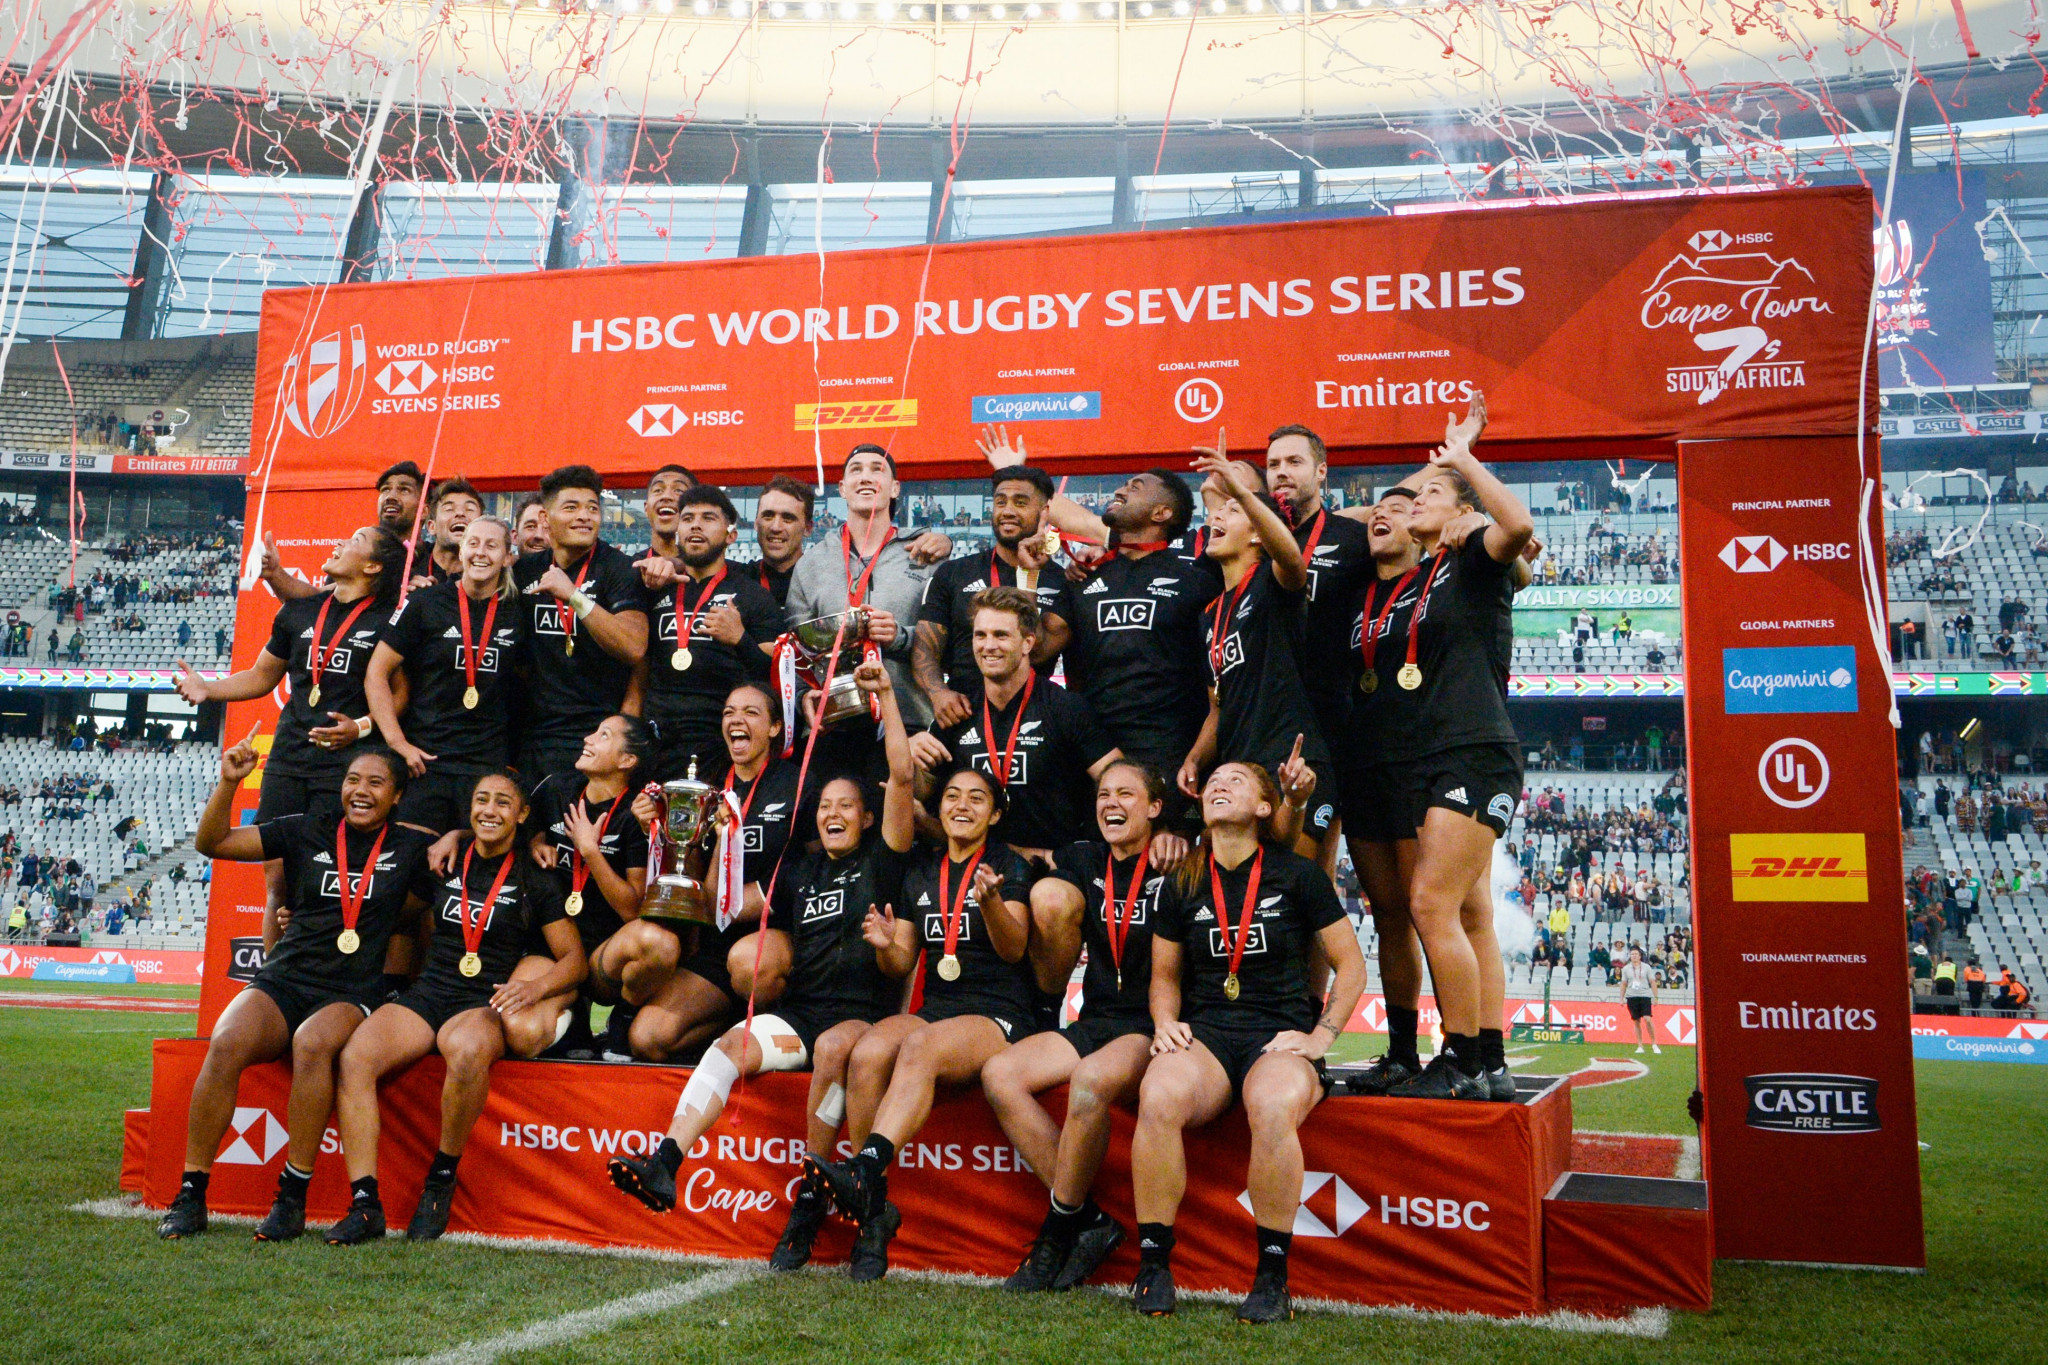 The HSBC World Rugby Sevens Series in Cape Town has been cancelled for a second year because of COVID-19 ©Getty Images